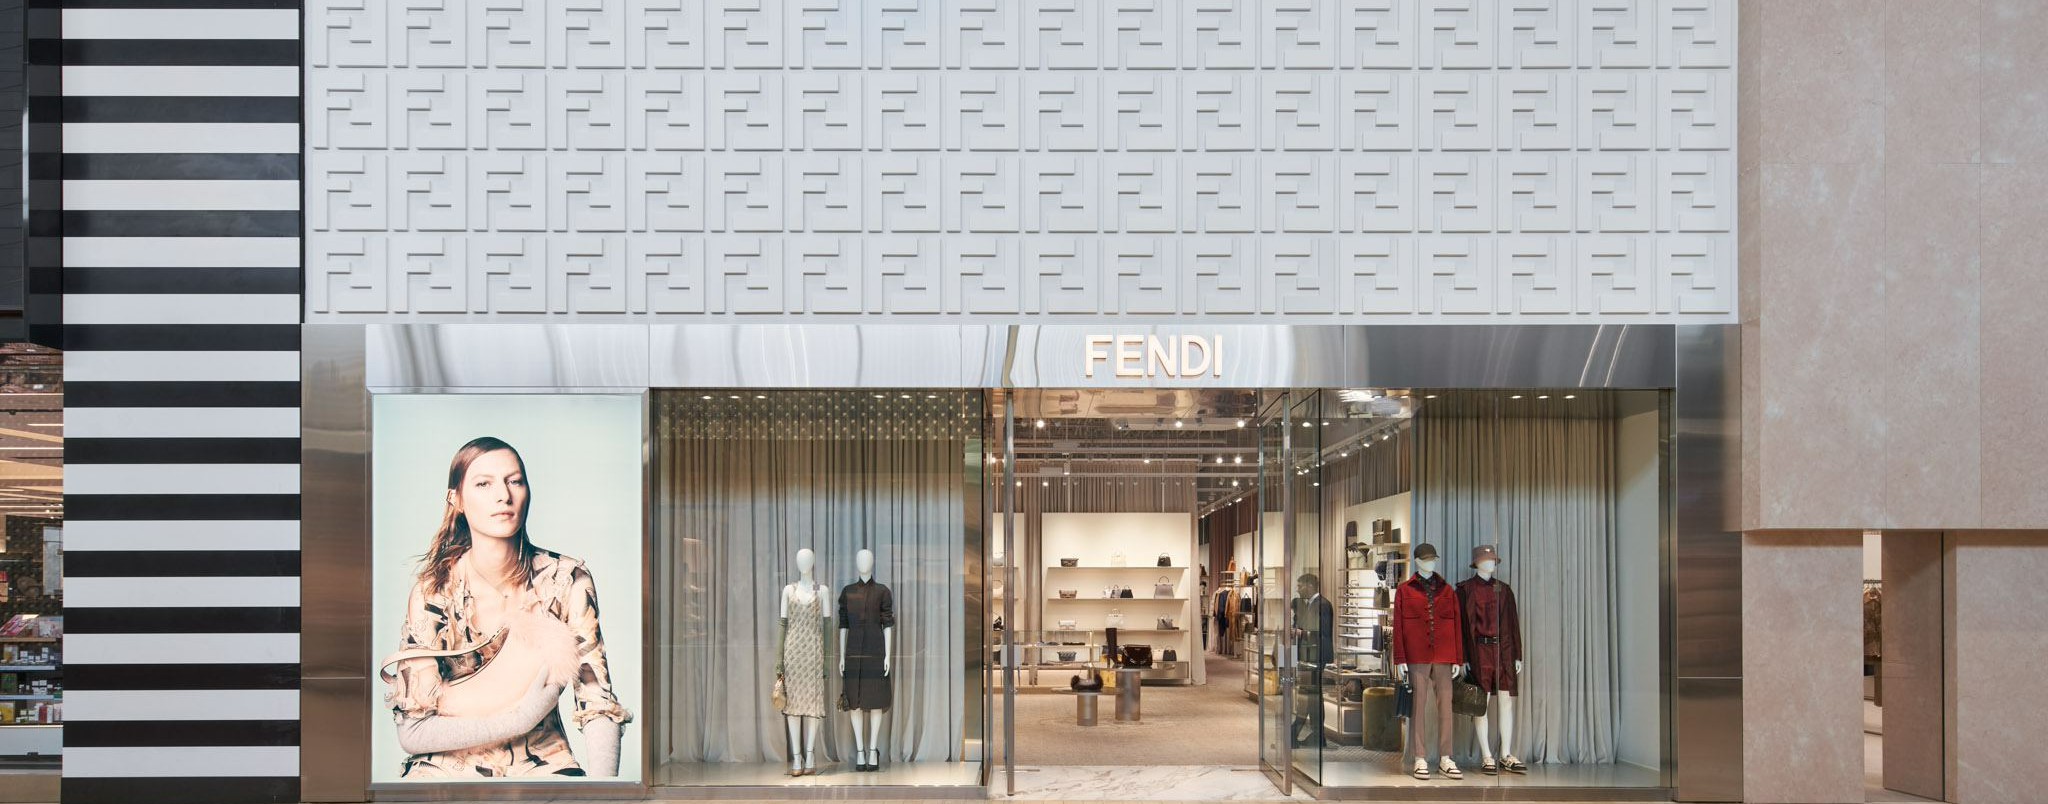 Fendi store at Yorkdale Shopping Centre